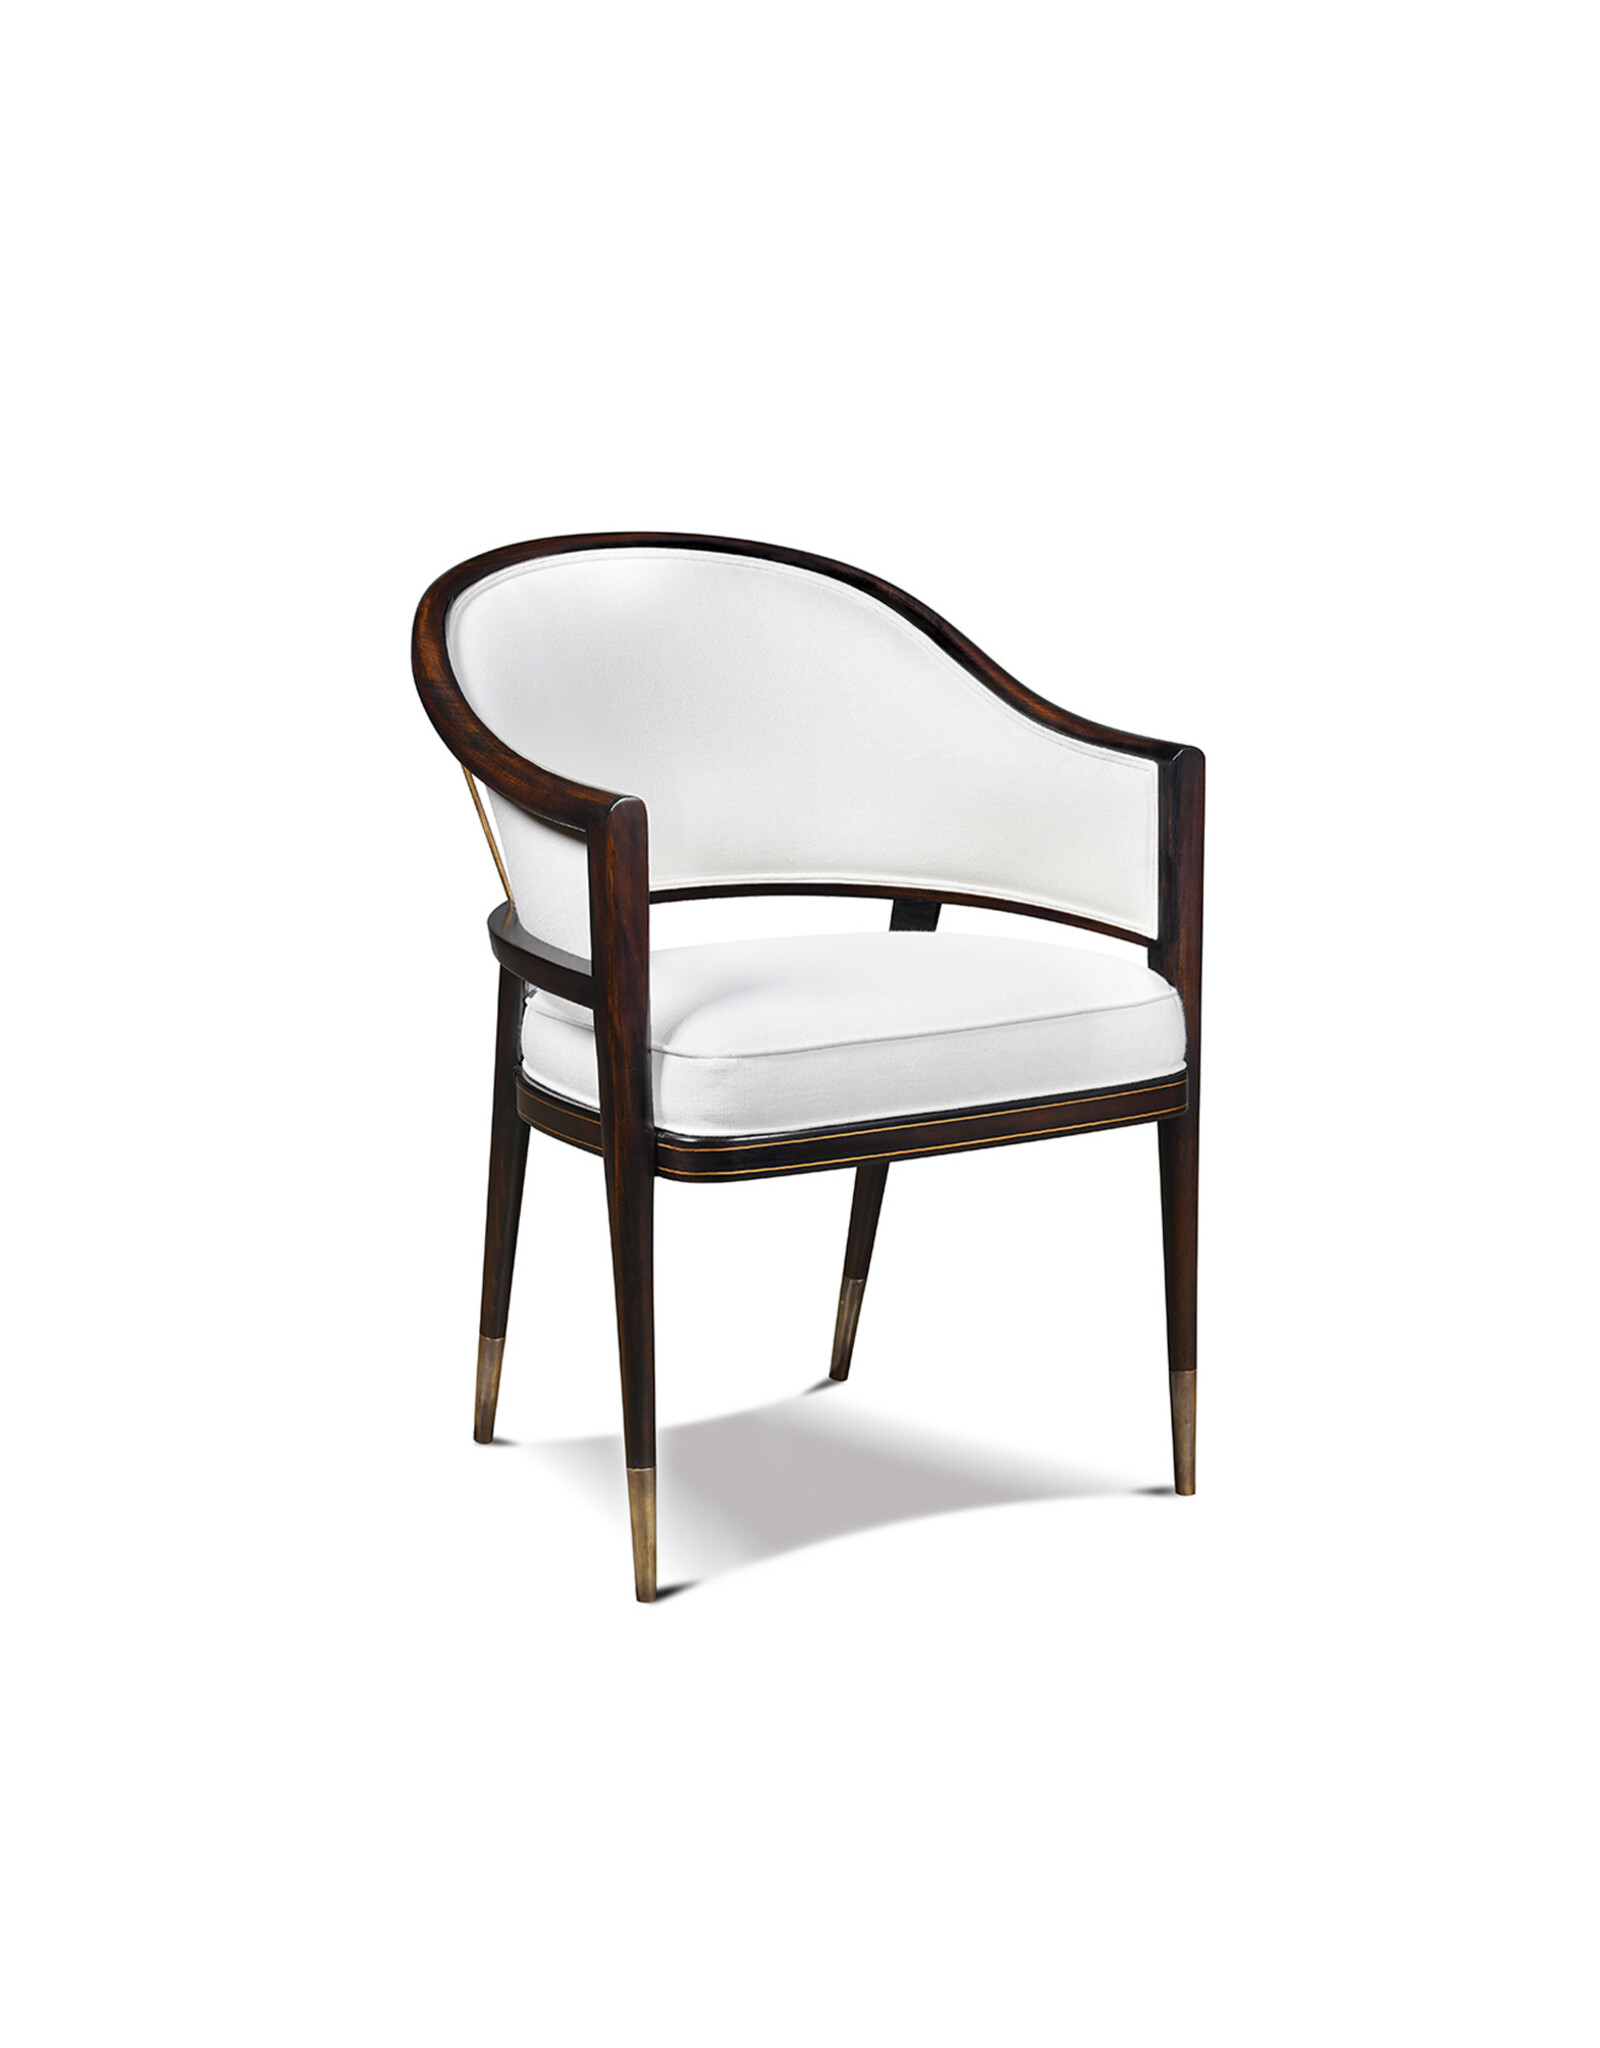 Grasse Upholstered Chair